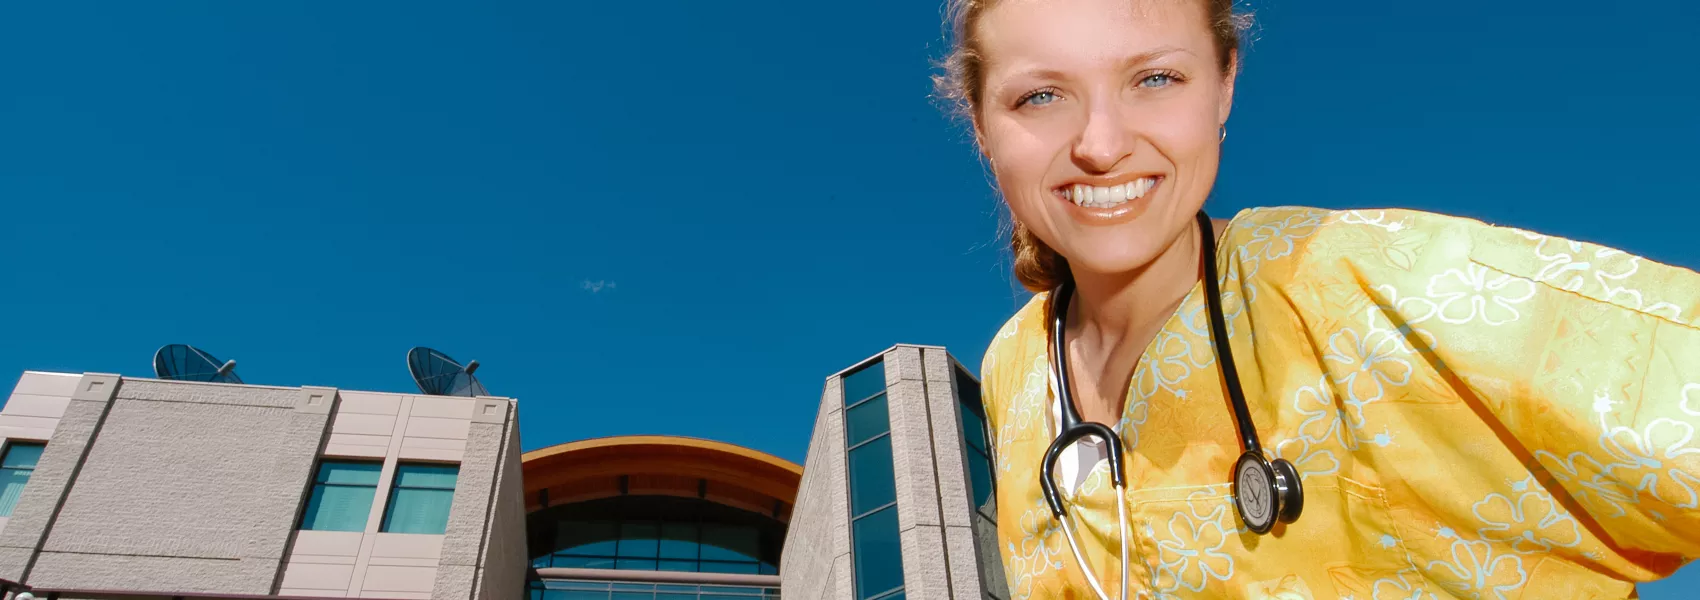 Nursing student standing in front of a UNBC building